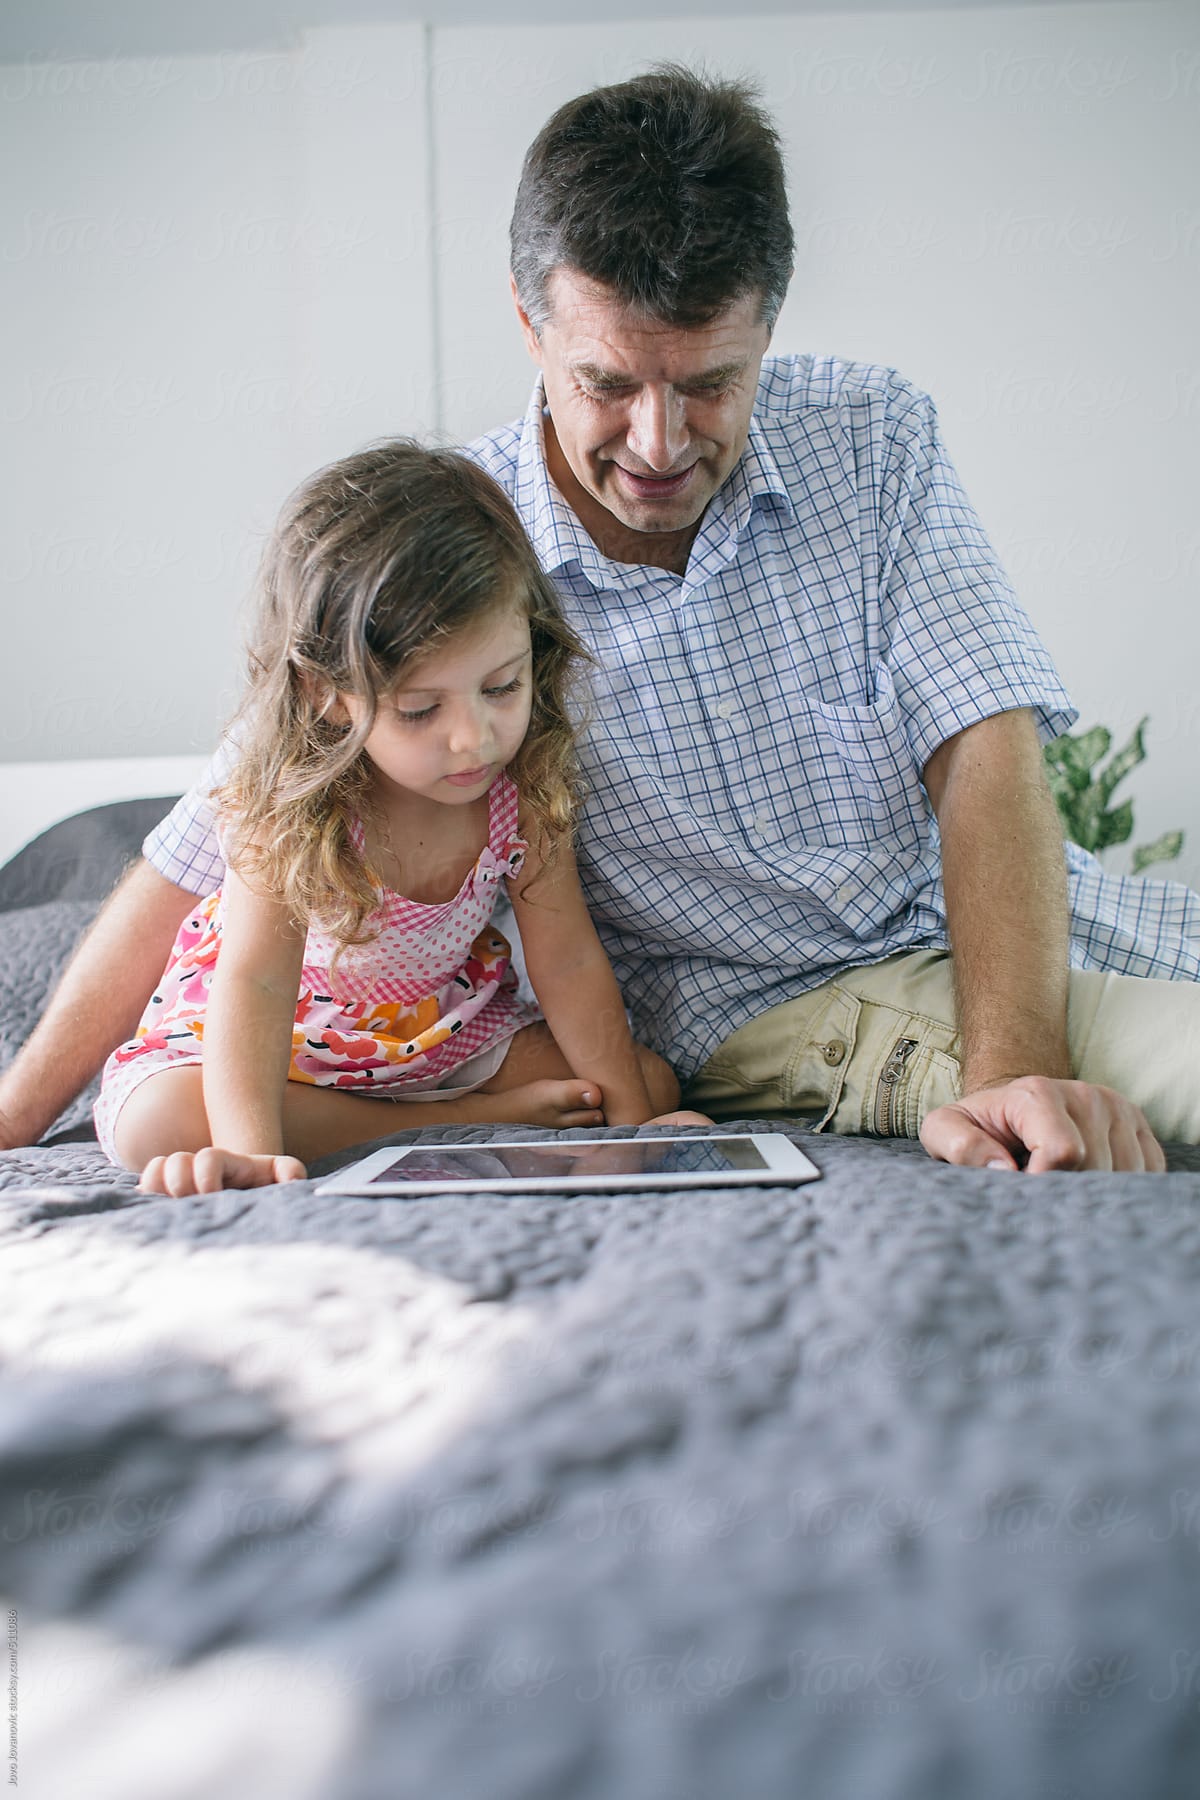 Father and his daughter watching cartoons on tablet